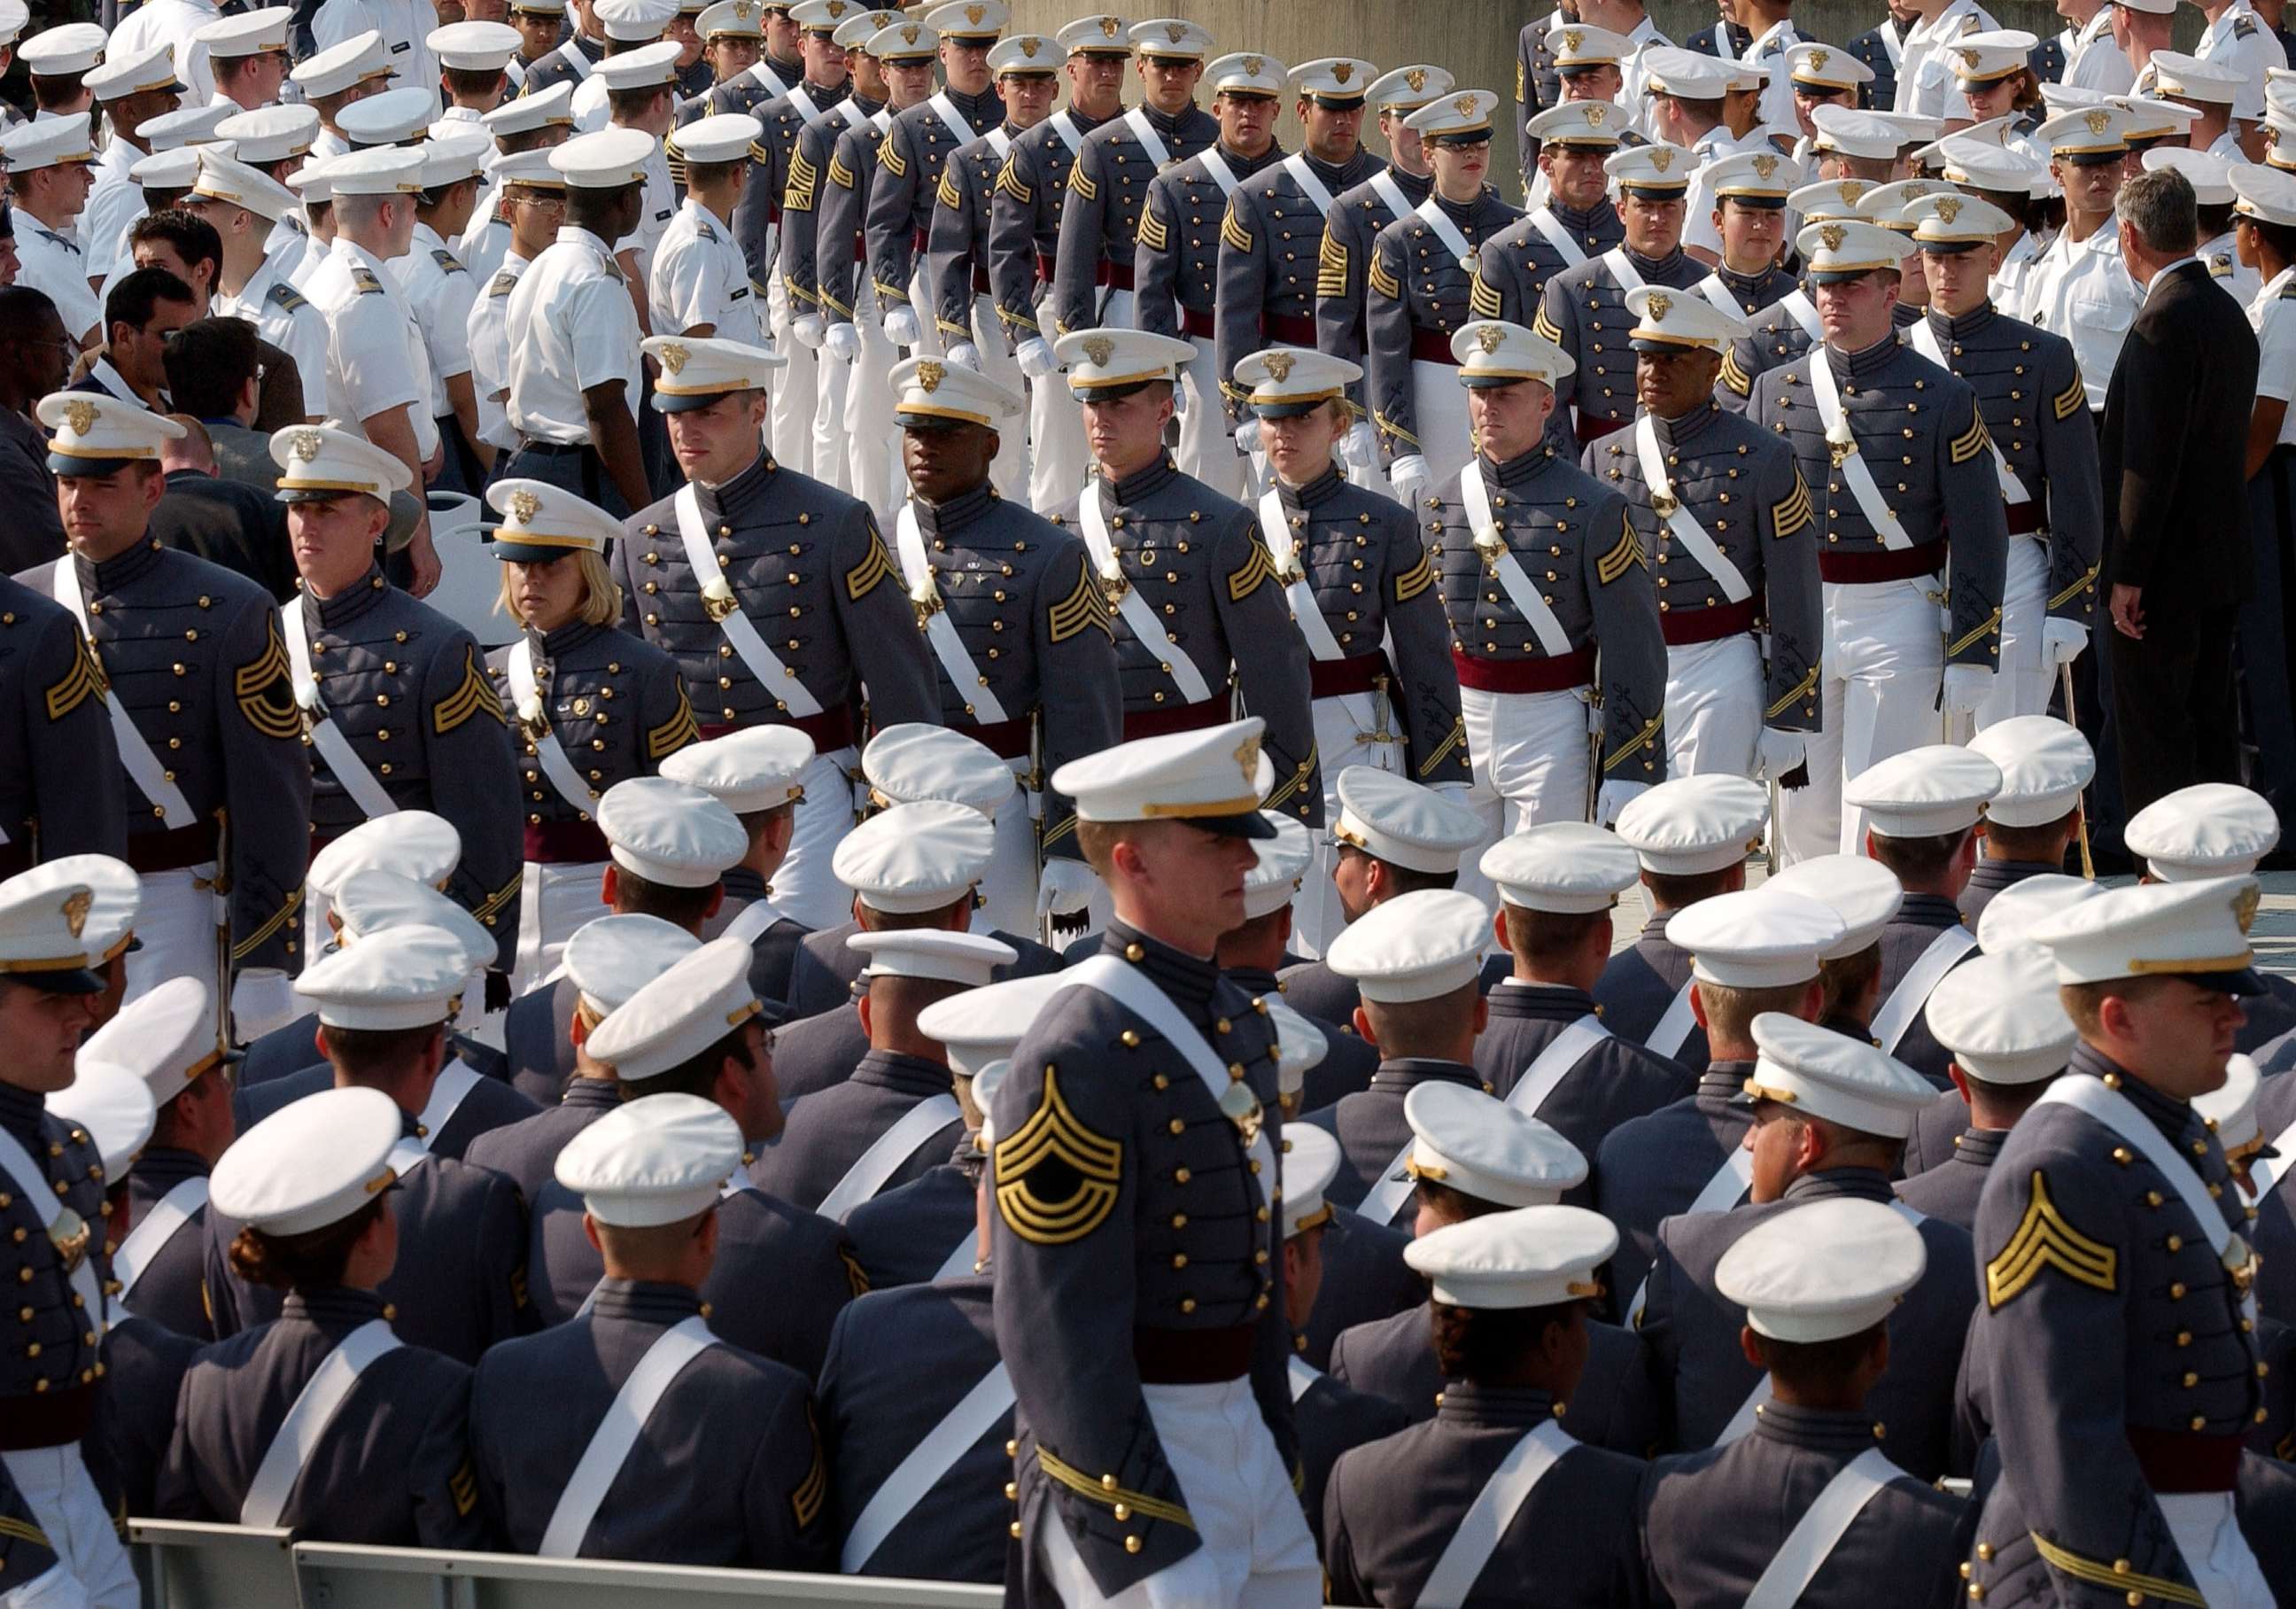 PHOTO: U.S. Military Academy cadets line up before receiving their diplomas and commissions into the officer corp of the U.S. Army June 1, 2002 at West Point in New York.